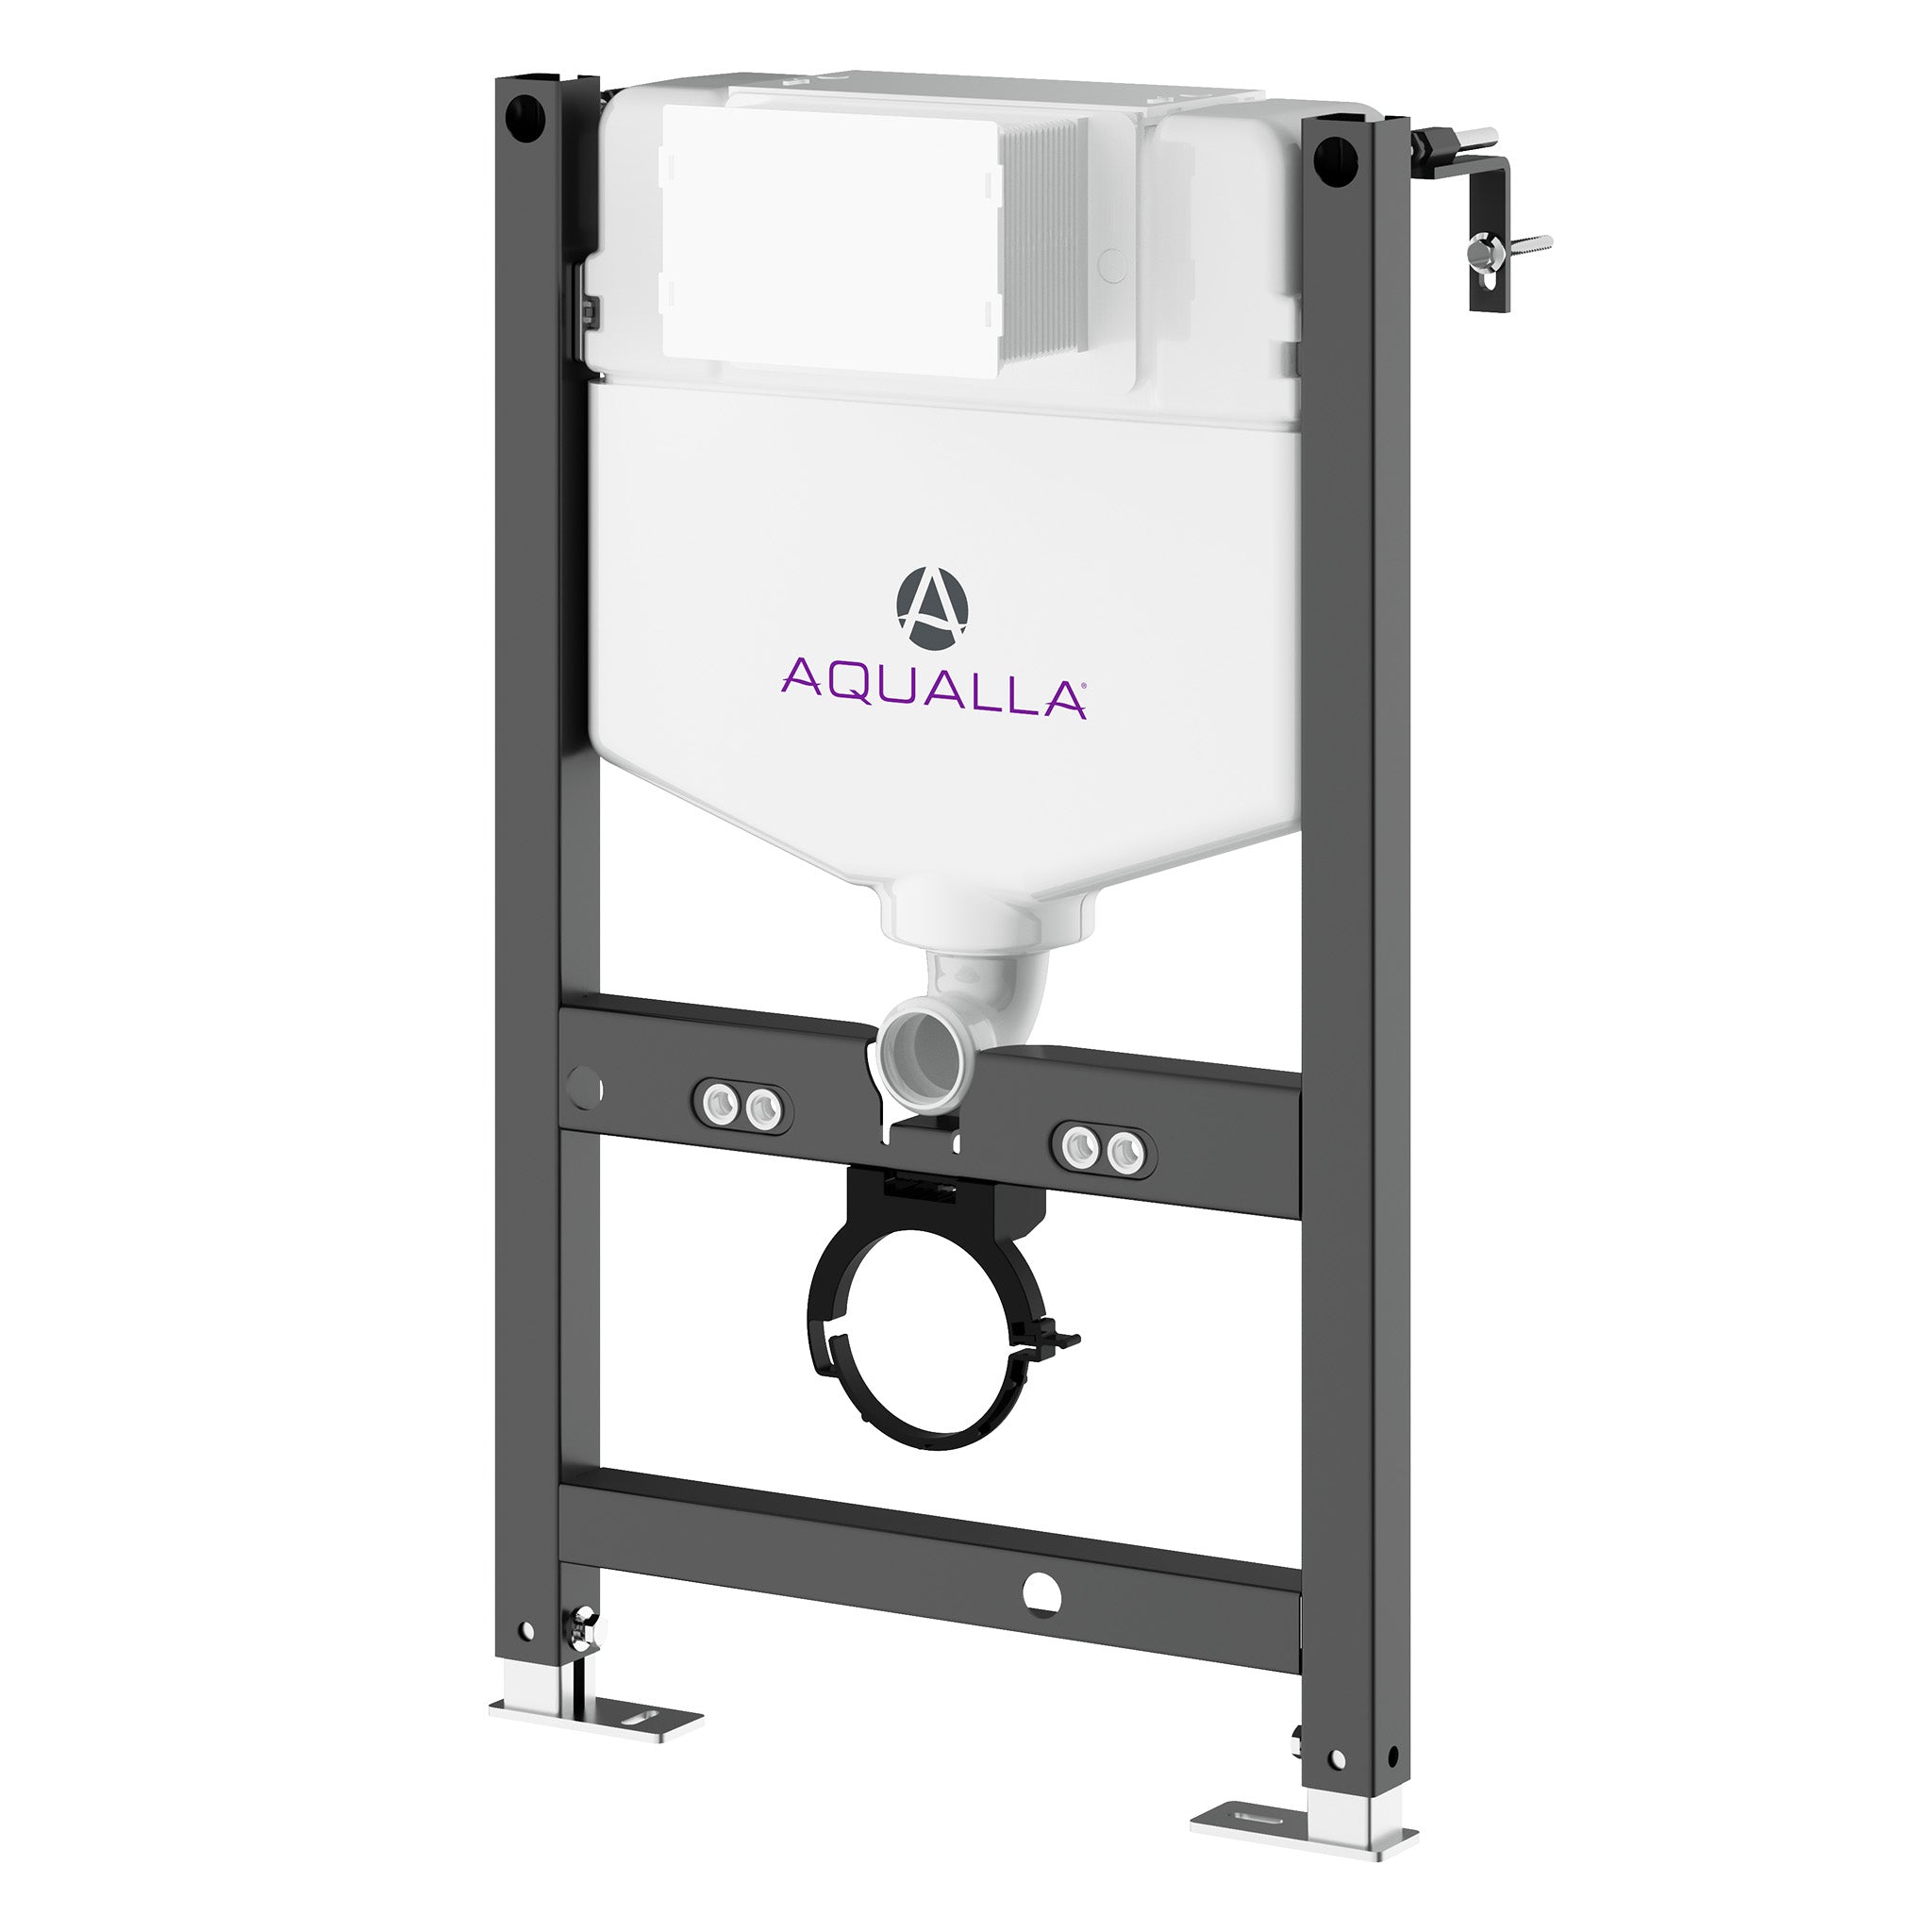 Aqualla 820mm Concealed Frame & Dual Flush Cistern For Wall Hung WC